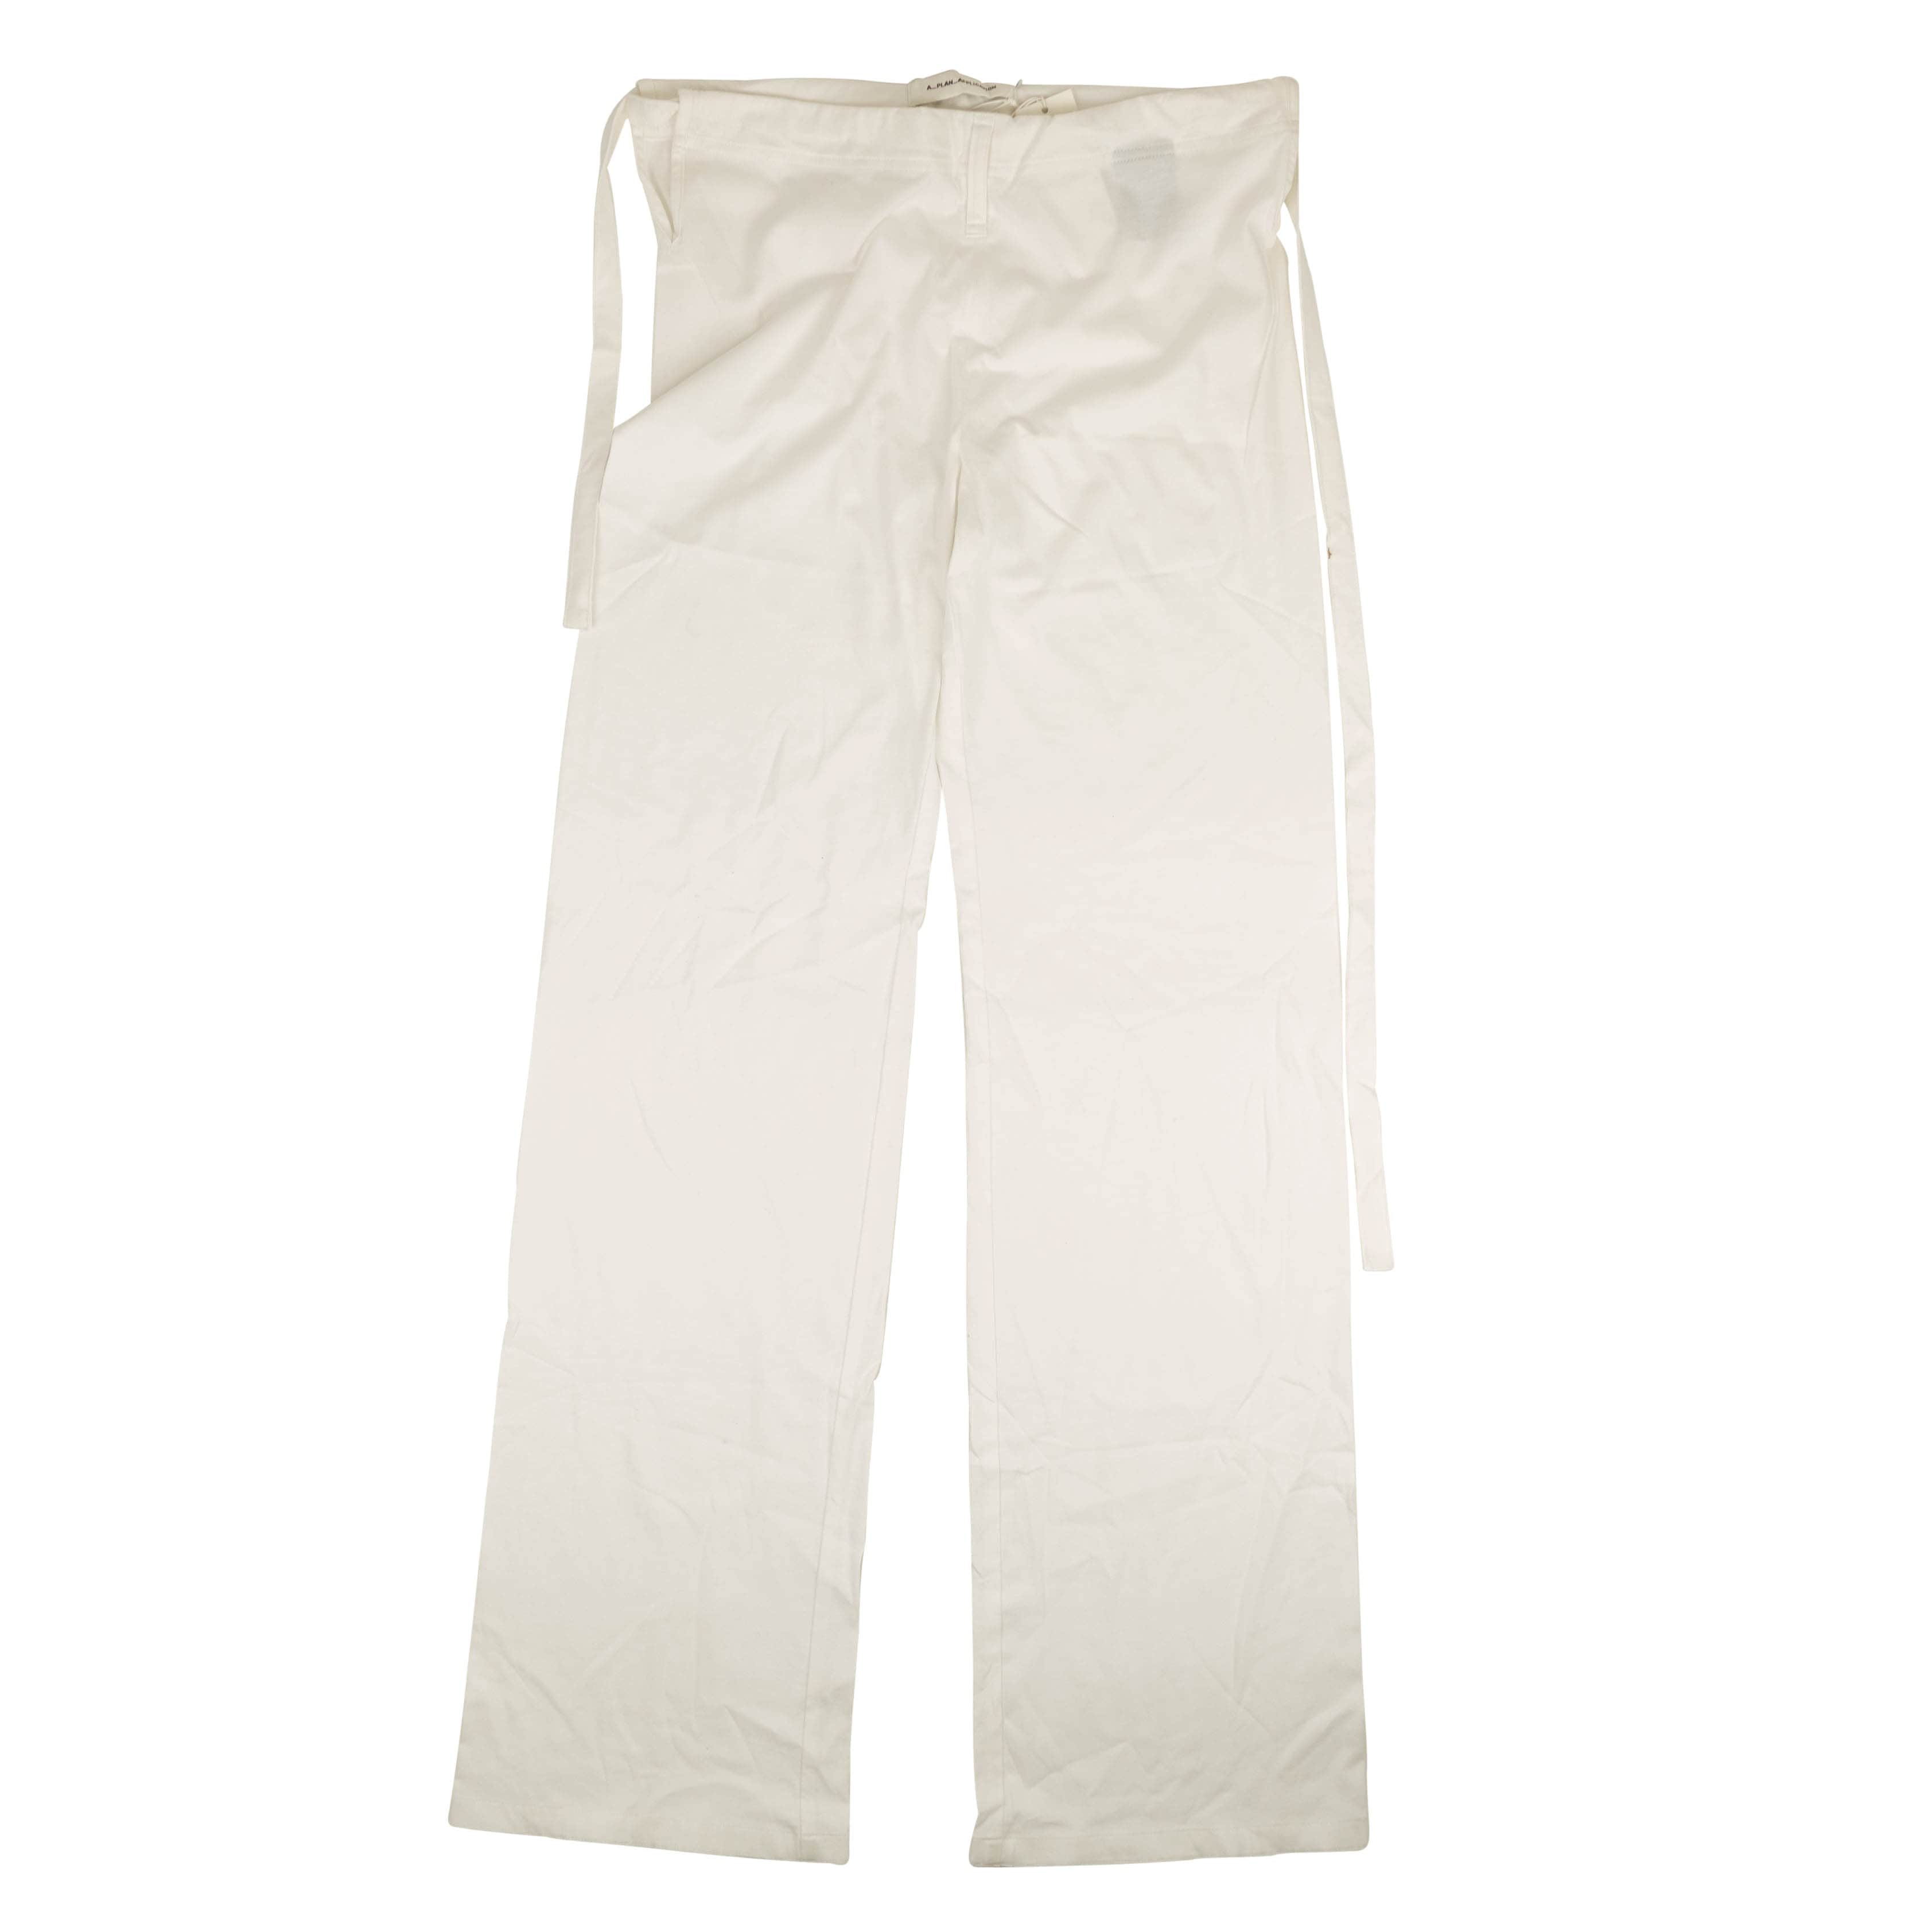 A_Plan_Application a_plan_application, channelenable-all, chicmi, couponcollection, gender-womens, main-clothing, size-s, under-250, womens-flared-pants S White Cotton Jersey Belted Pants 74NGG-AP-1013/S 74NGG-AP-1013/S